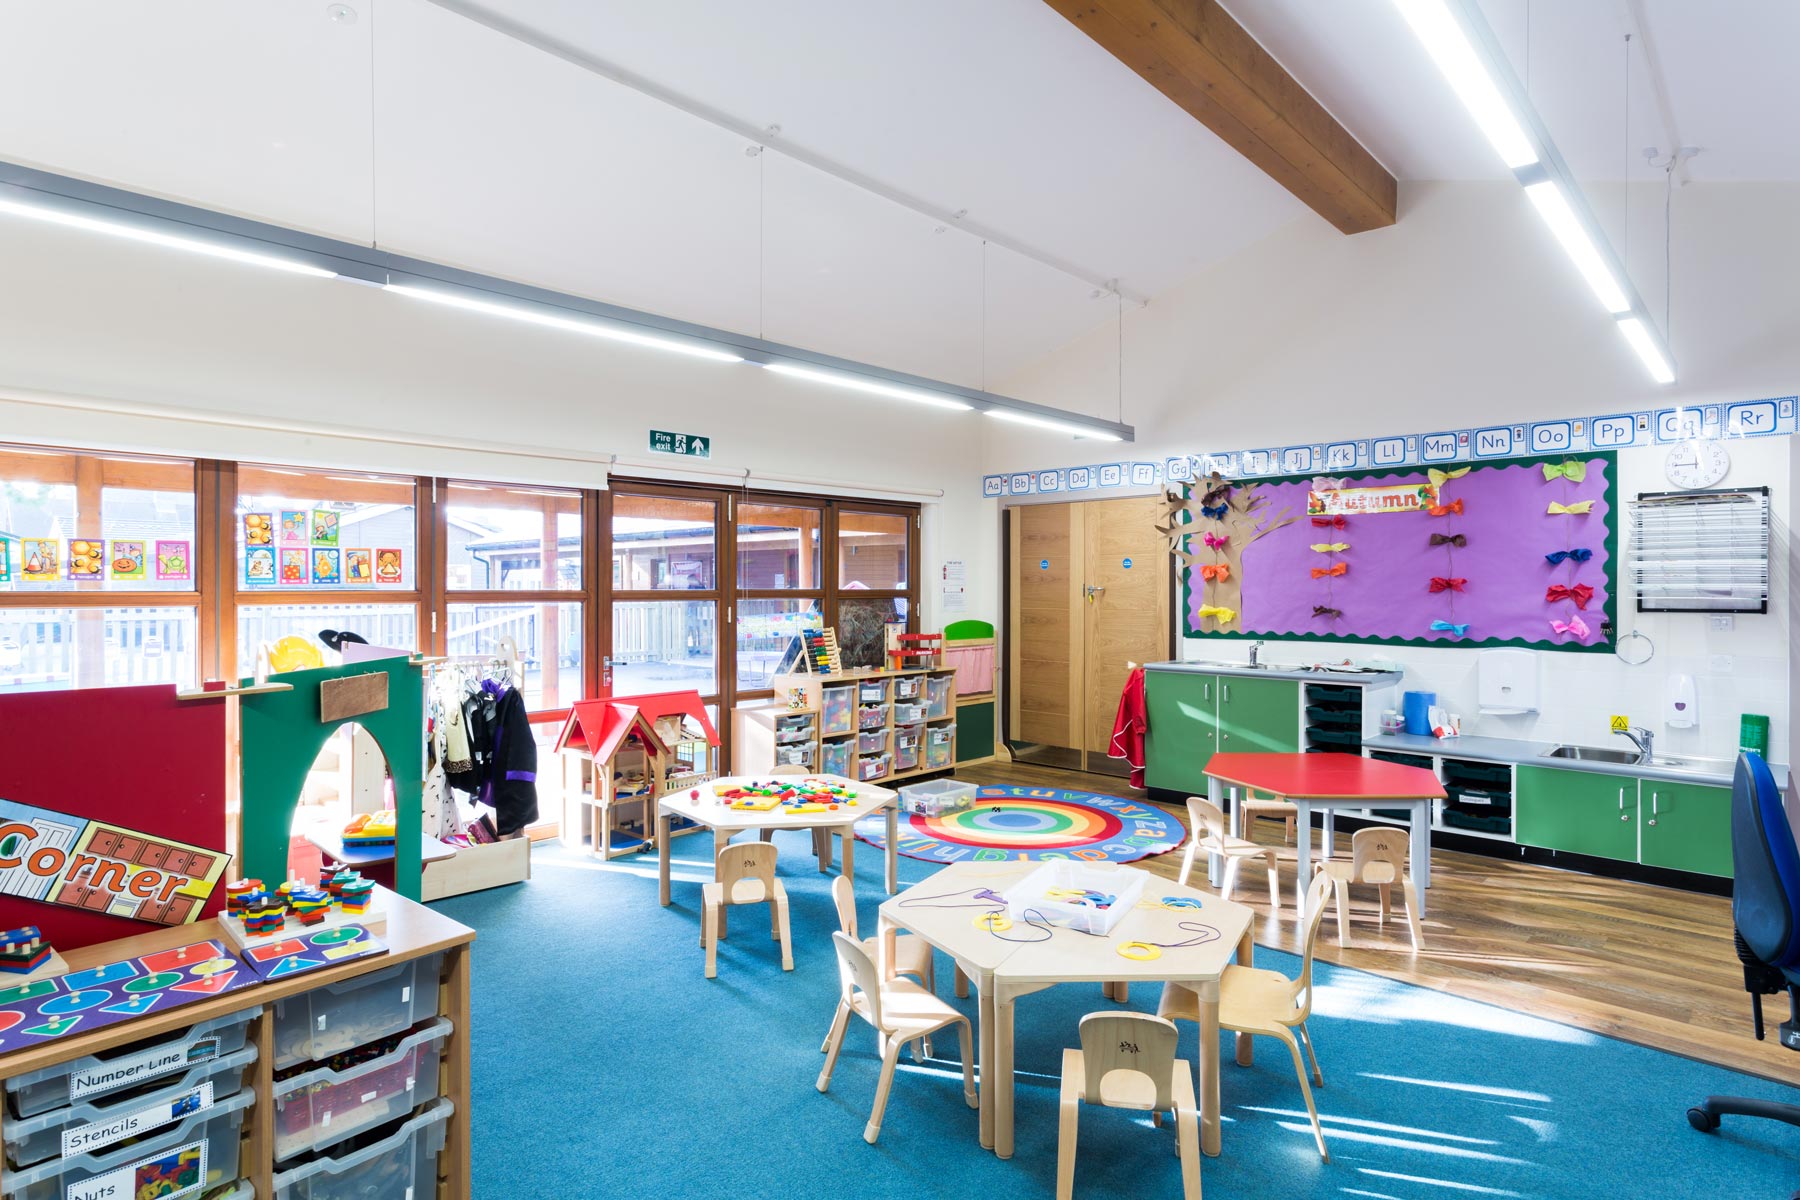 The Oratory Preparatory School- New timber-frame build Early Years department